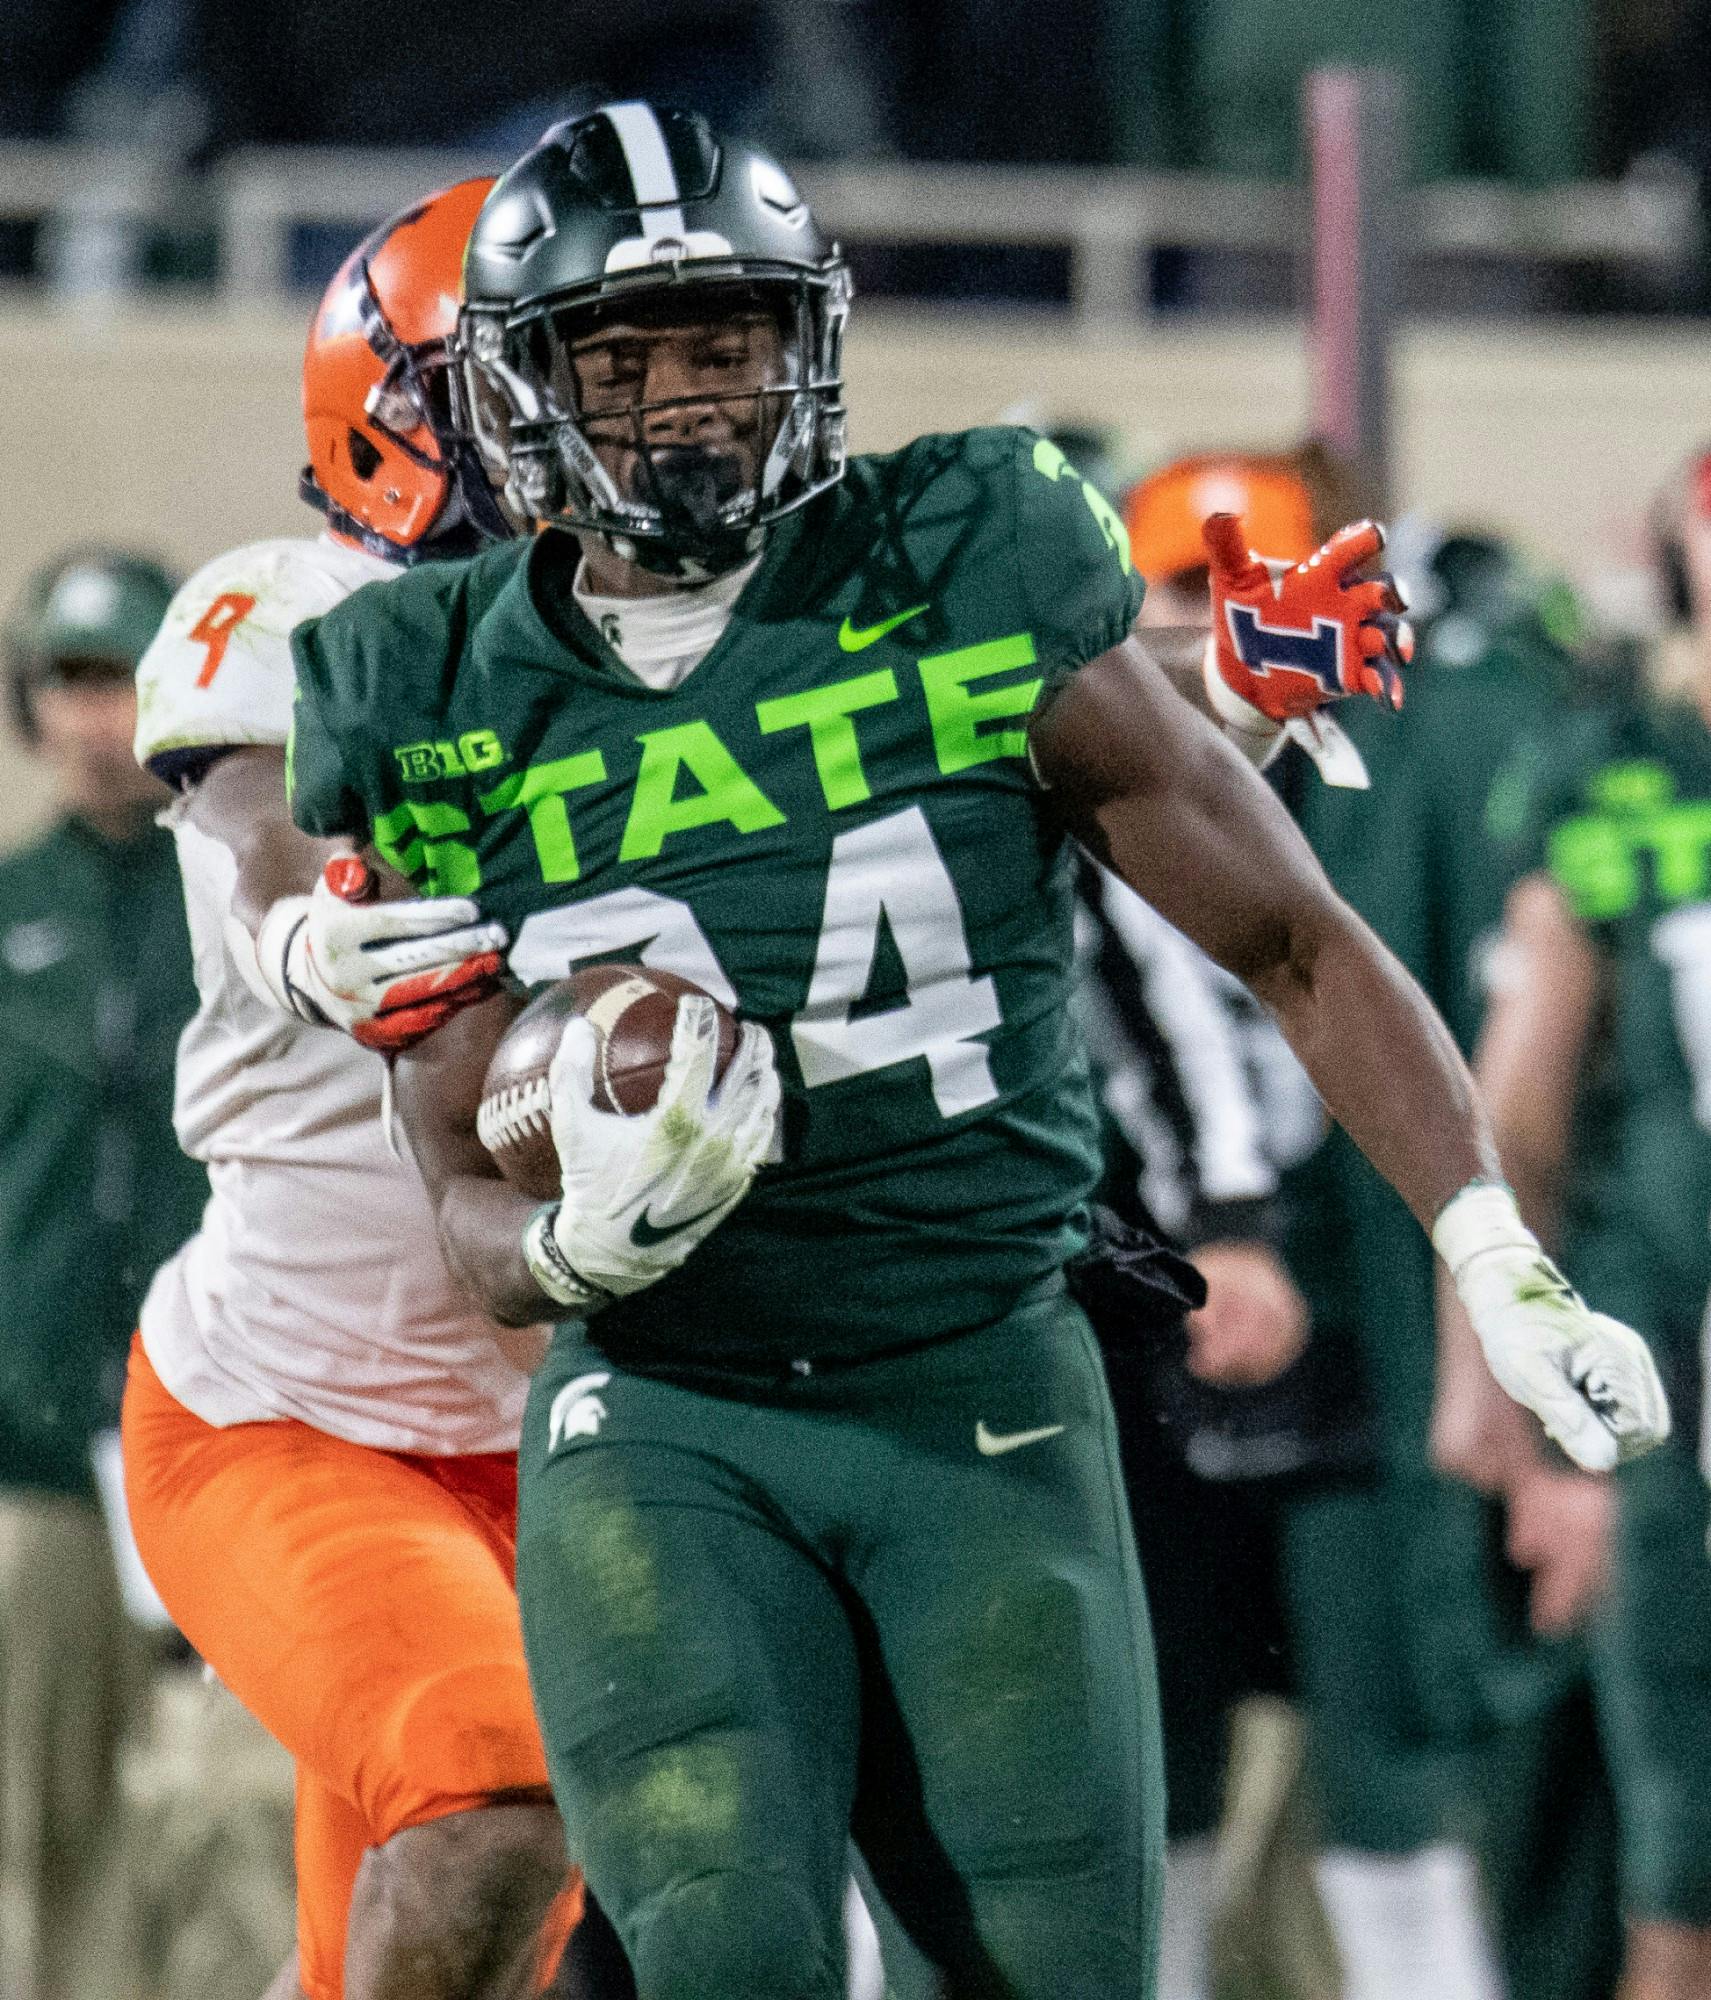 <p>Redshirt freshman Elijah Collins (24) is brought down on a long run during the game against Illinois on Nov. 9, 2019, at Spartan Stadium. The Spartans fell to the Fighting Illini, 37-34.</p>